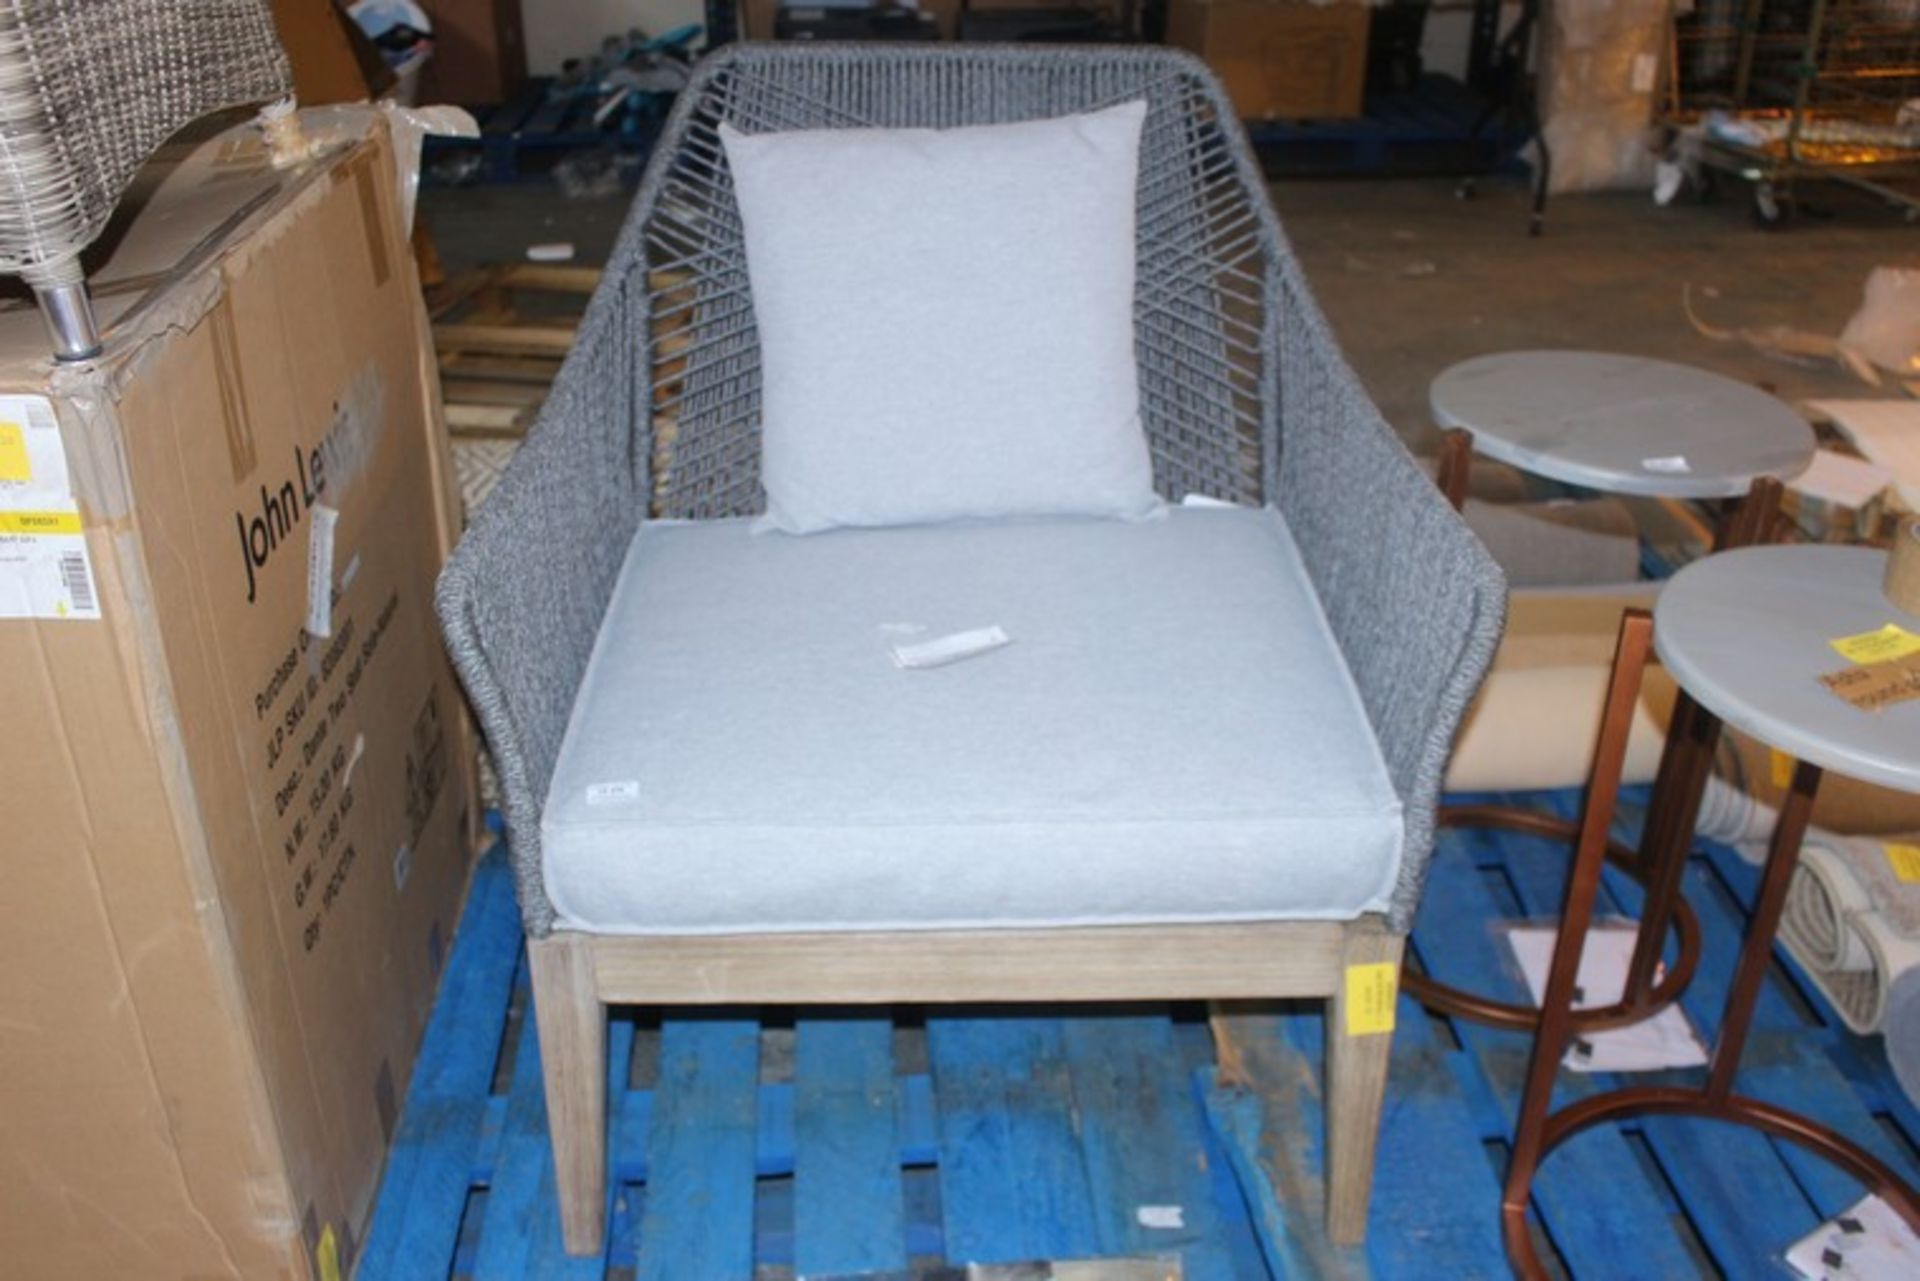 1 x LEIA LOUNGING ARM CHAIR (16.01.18) (82080402) *PLEASE NOTE THAT THE BID PRICE IS MULTIPLIED BY